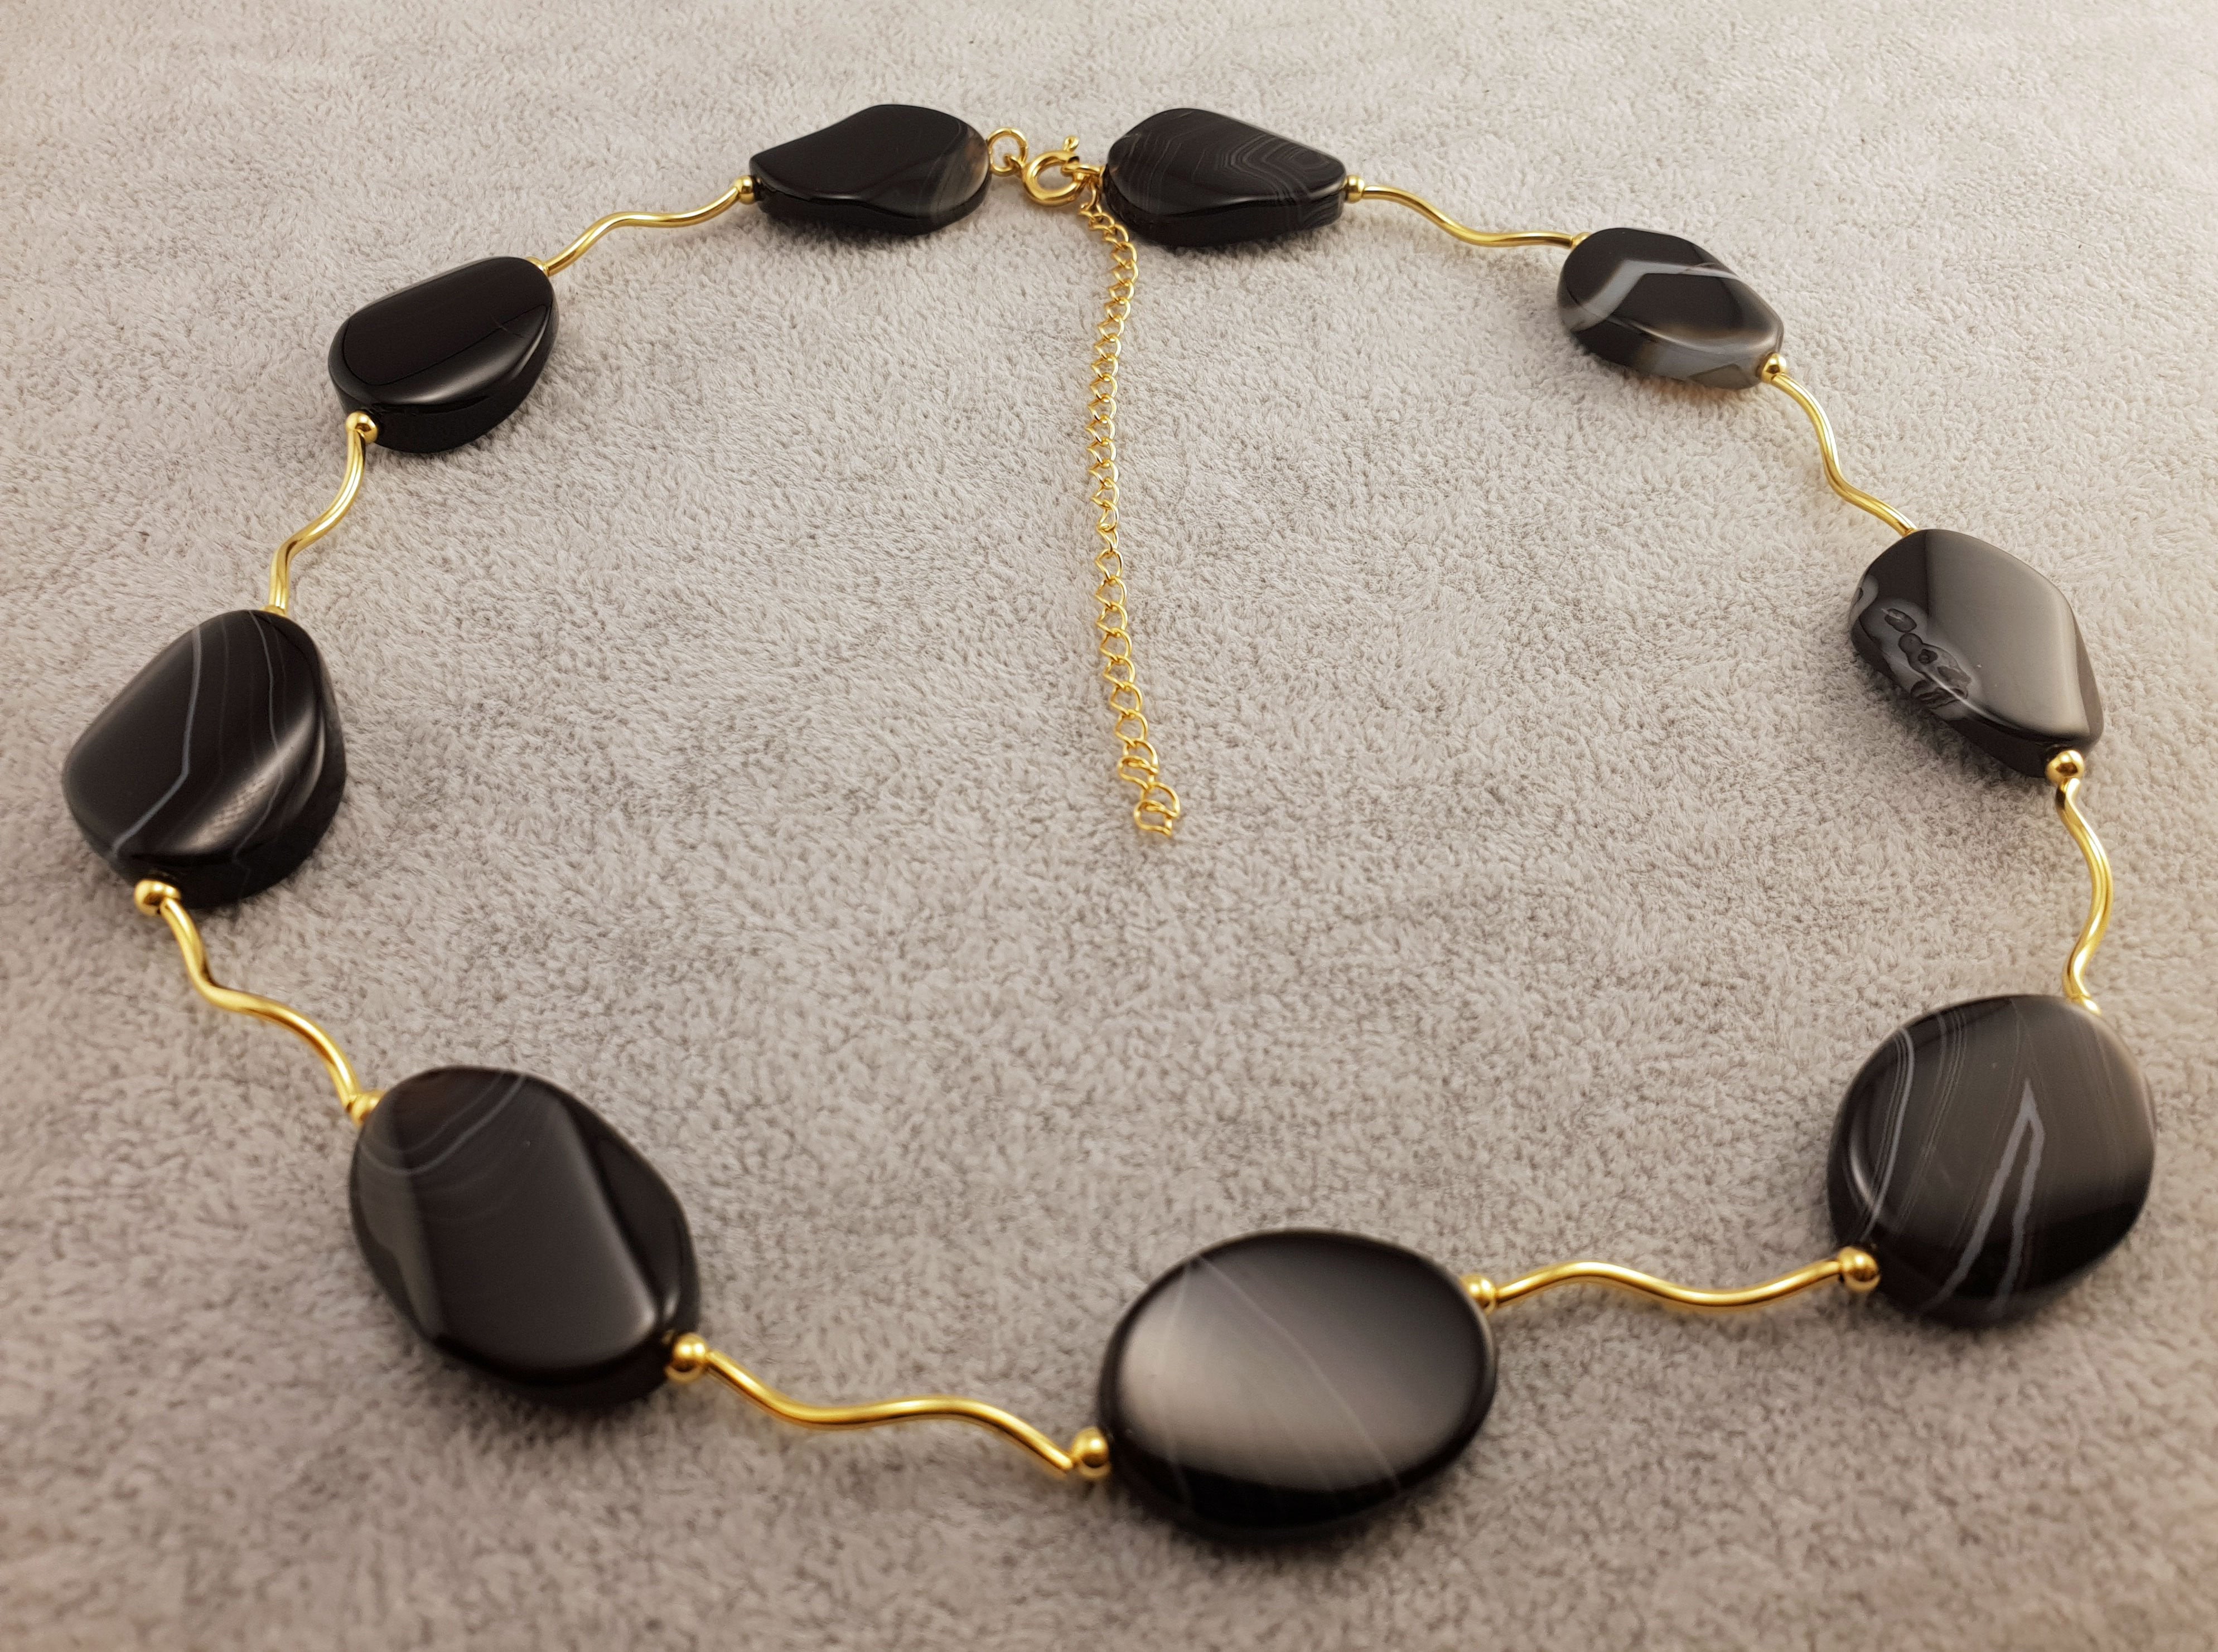 Agate Necklace - Flat Oval Beads - By Janine Jewellery